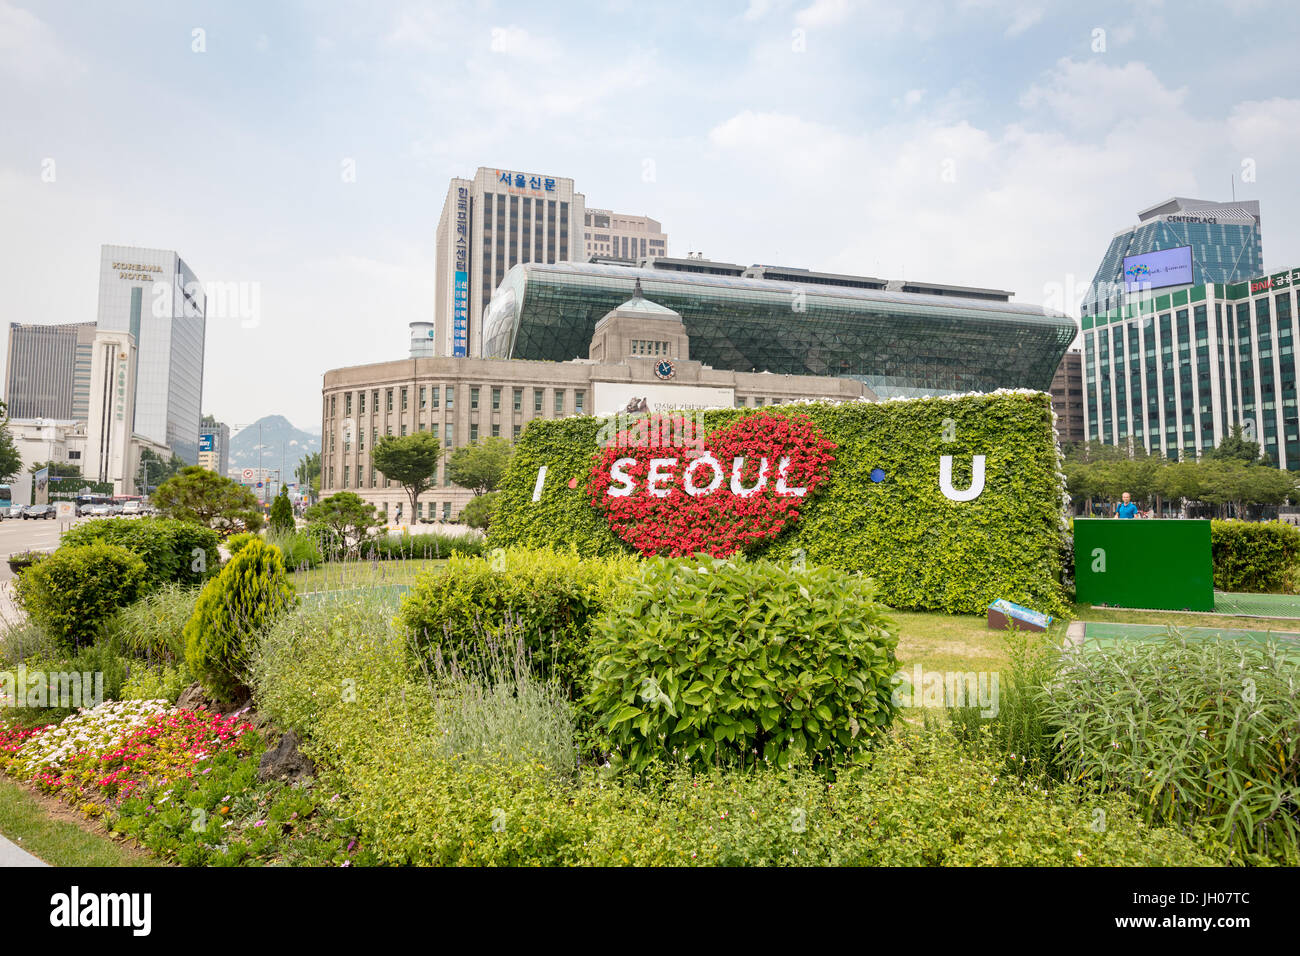 Seoul City hall with I SEOUL U on Jun 19, 2017. City Hall is a governmental building for the Seoul Metropolitan Government in South Korea. Stock Photo